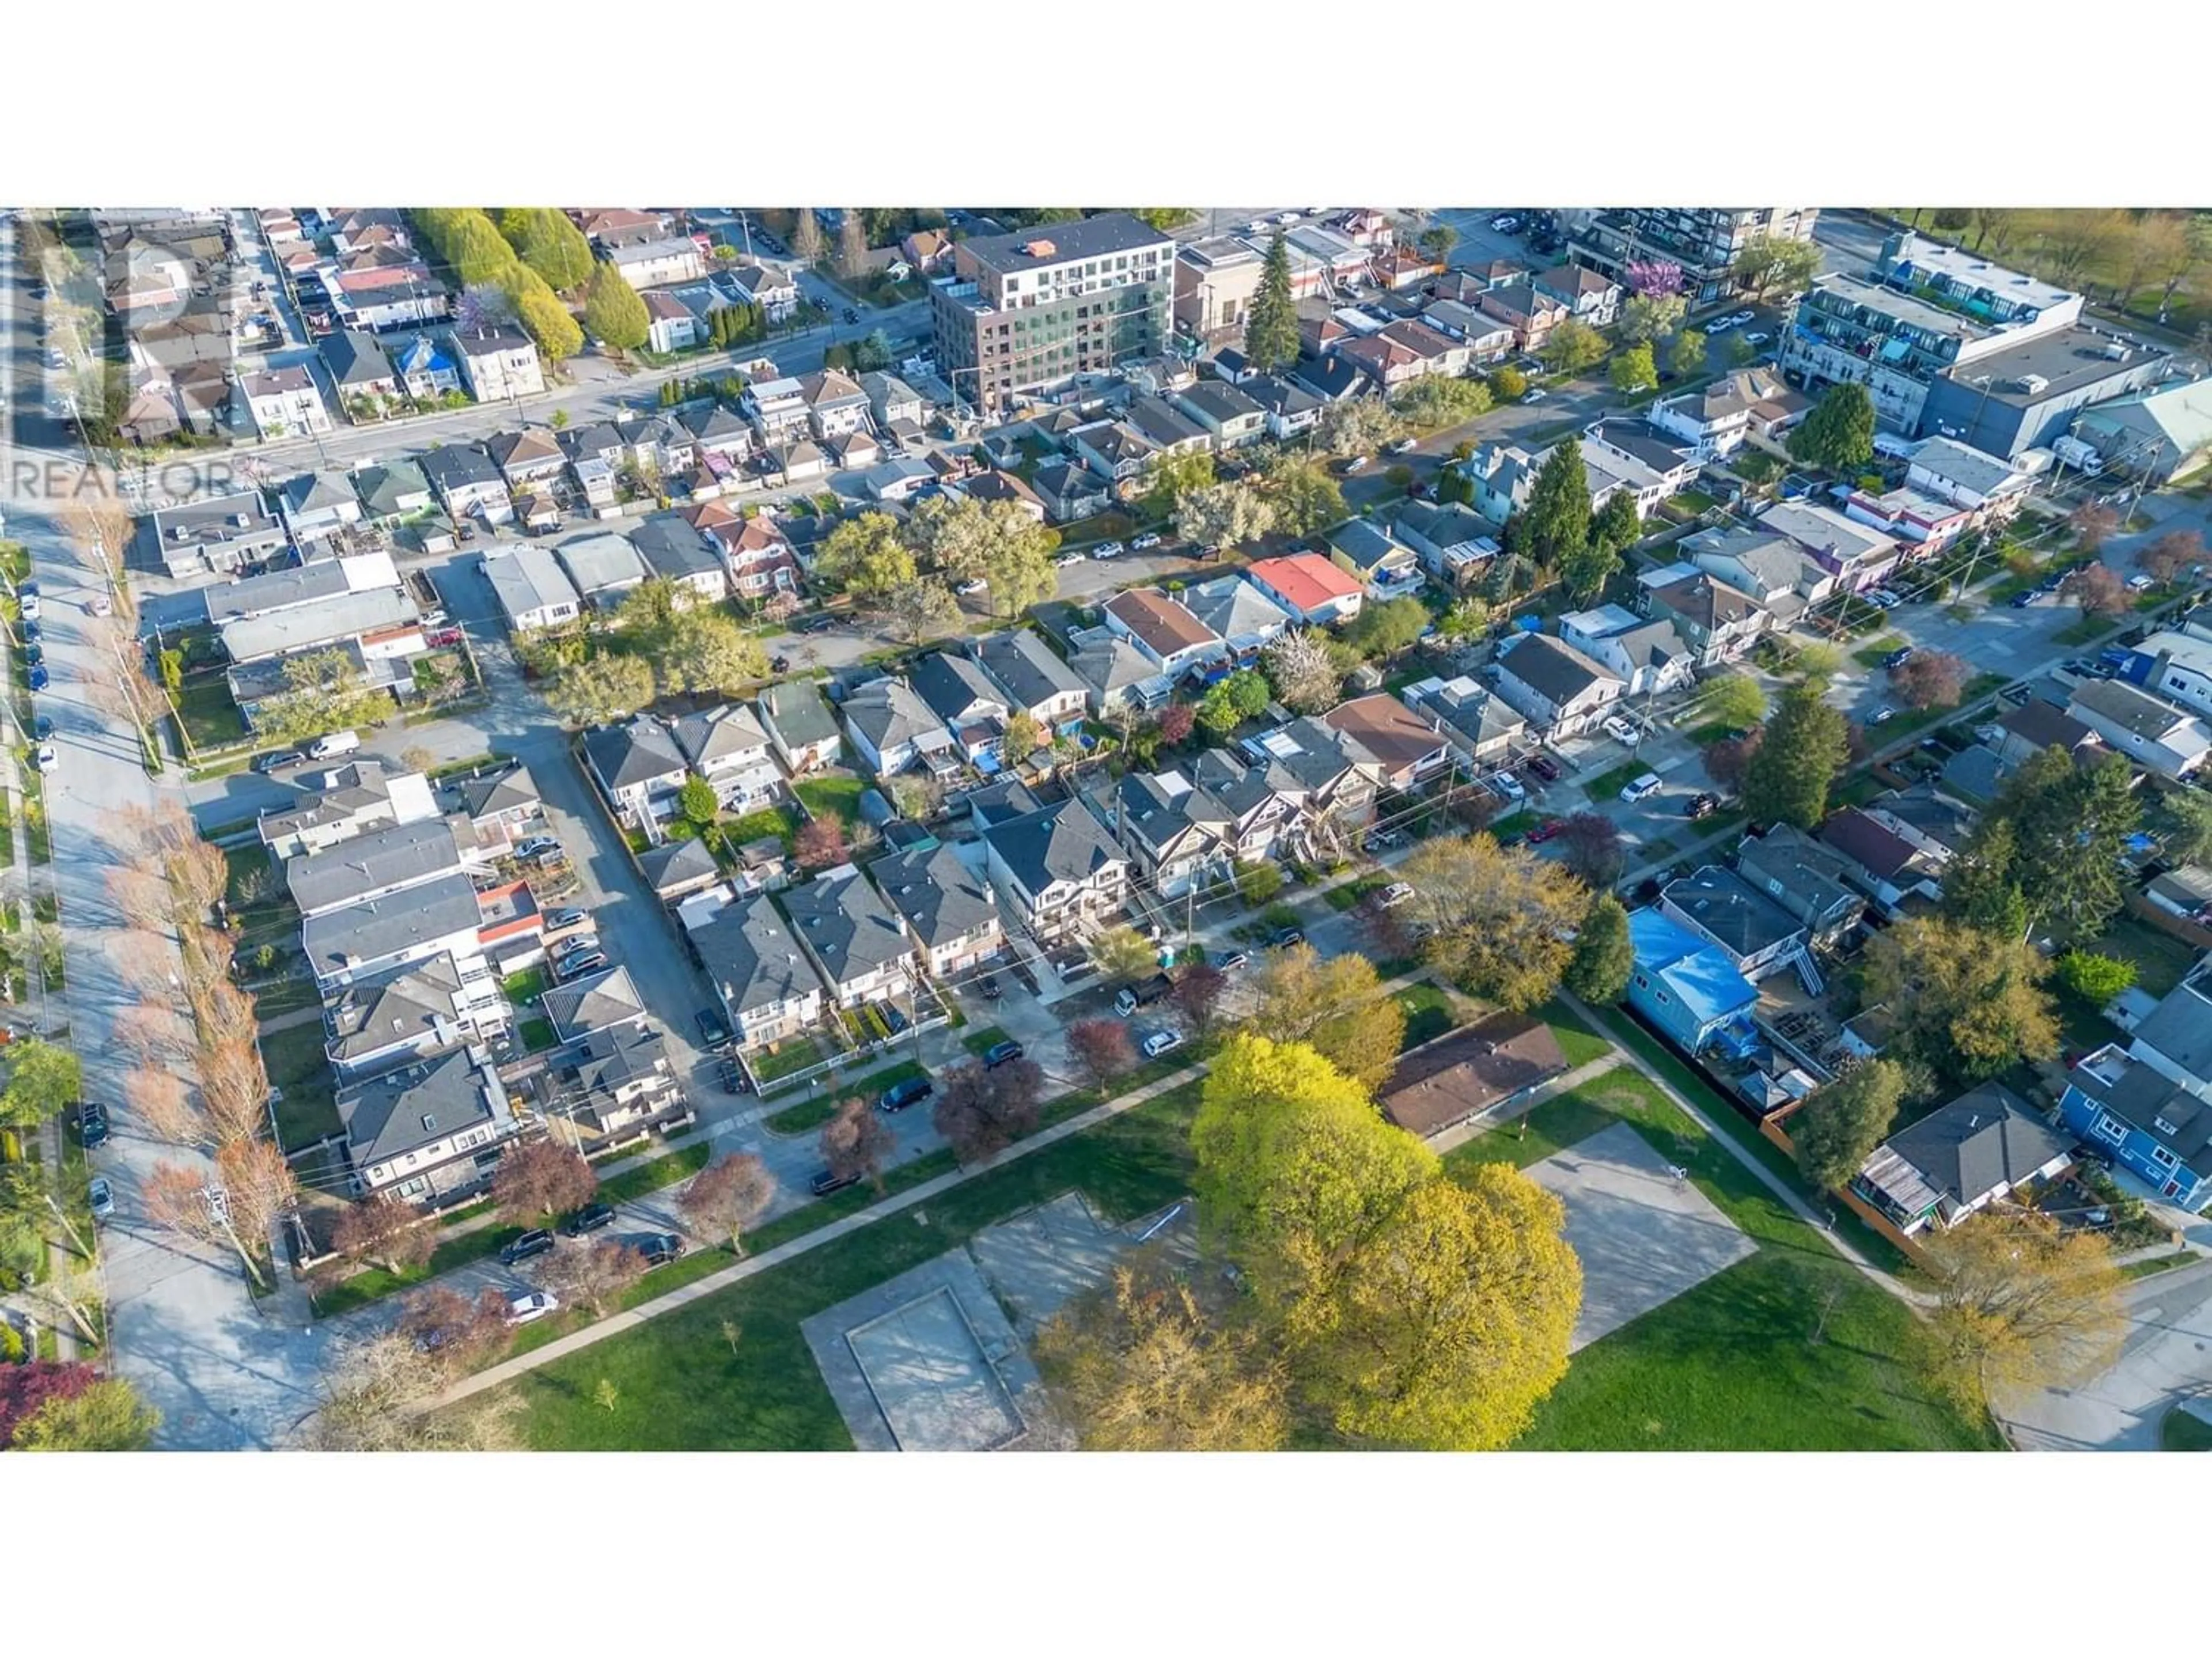 Lakeview for 5347 MCKINNON STREET, Vancouver British Columbia V5R4C7